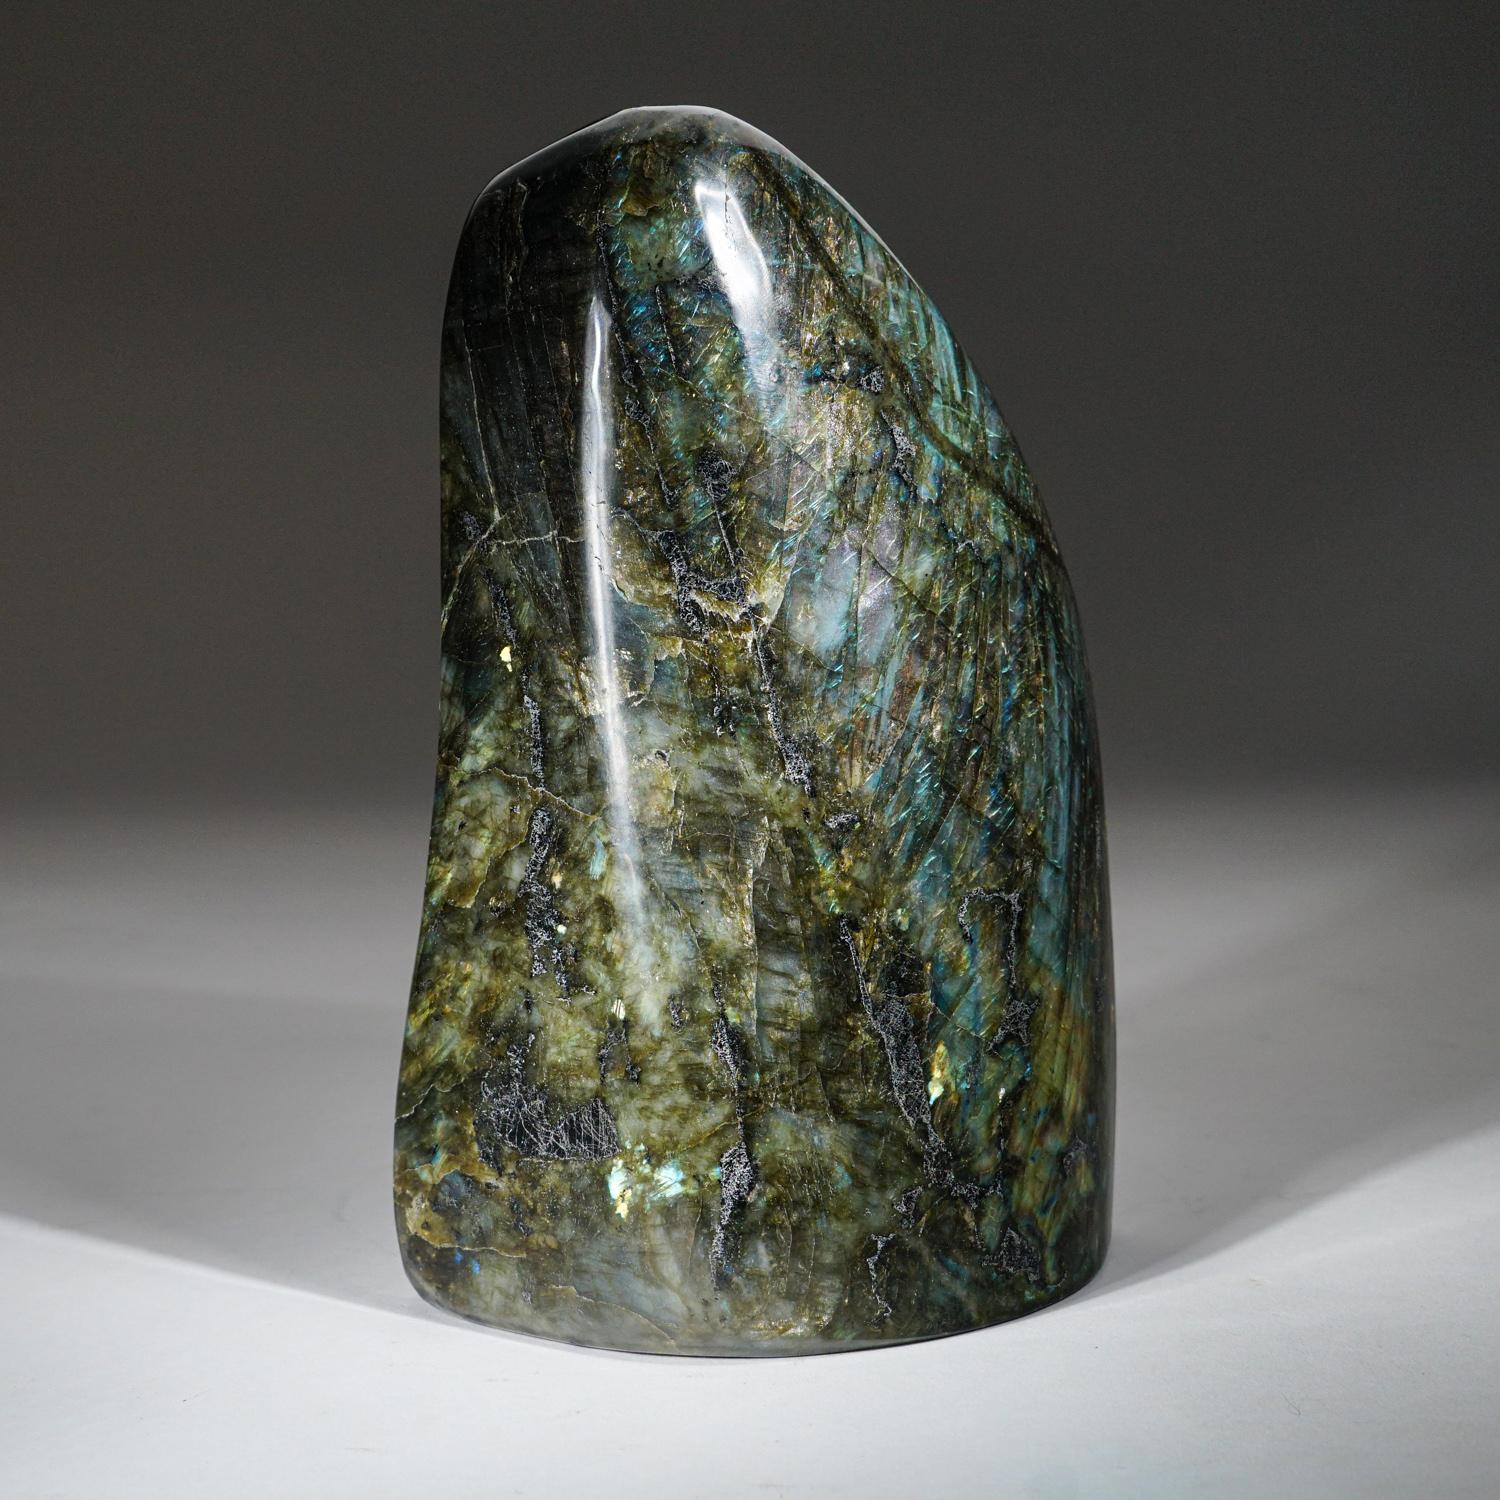 Handmade polished Labradorite freeform with beautiful iridescent play of colors of blue, yellow and red which is caused by internal fractures in the mineral that reflect light back and forth, dispersing it into different colors.

Highly mystical,